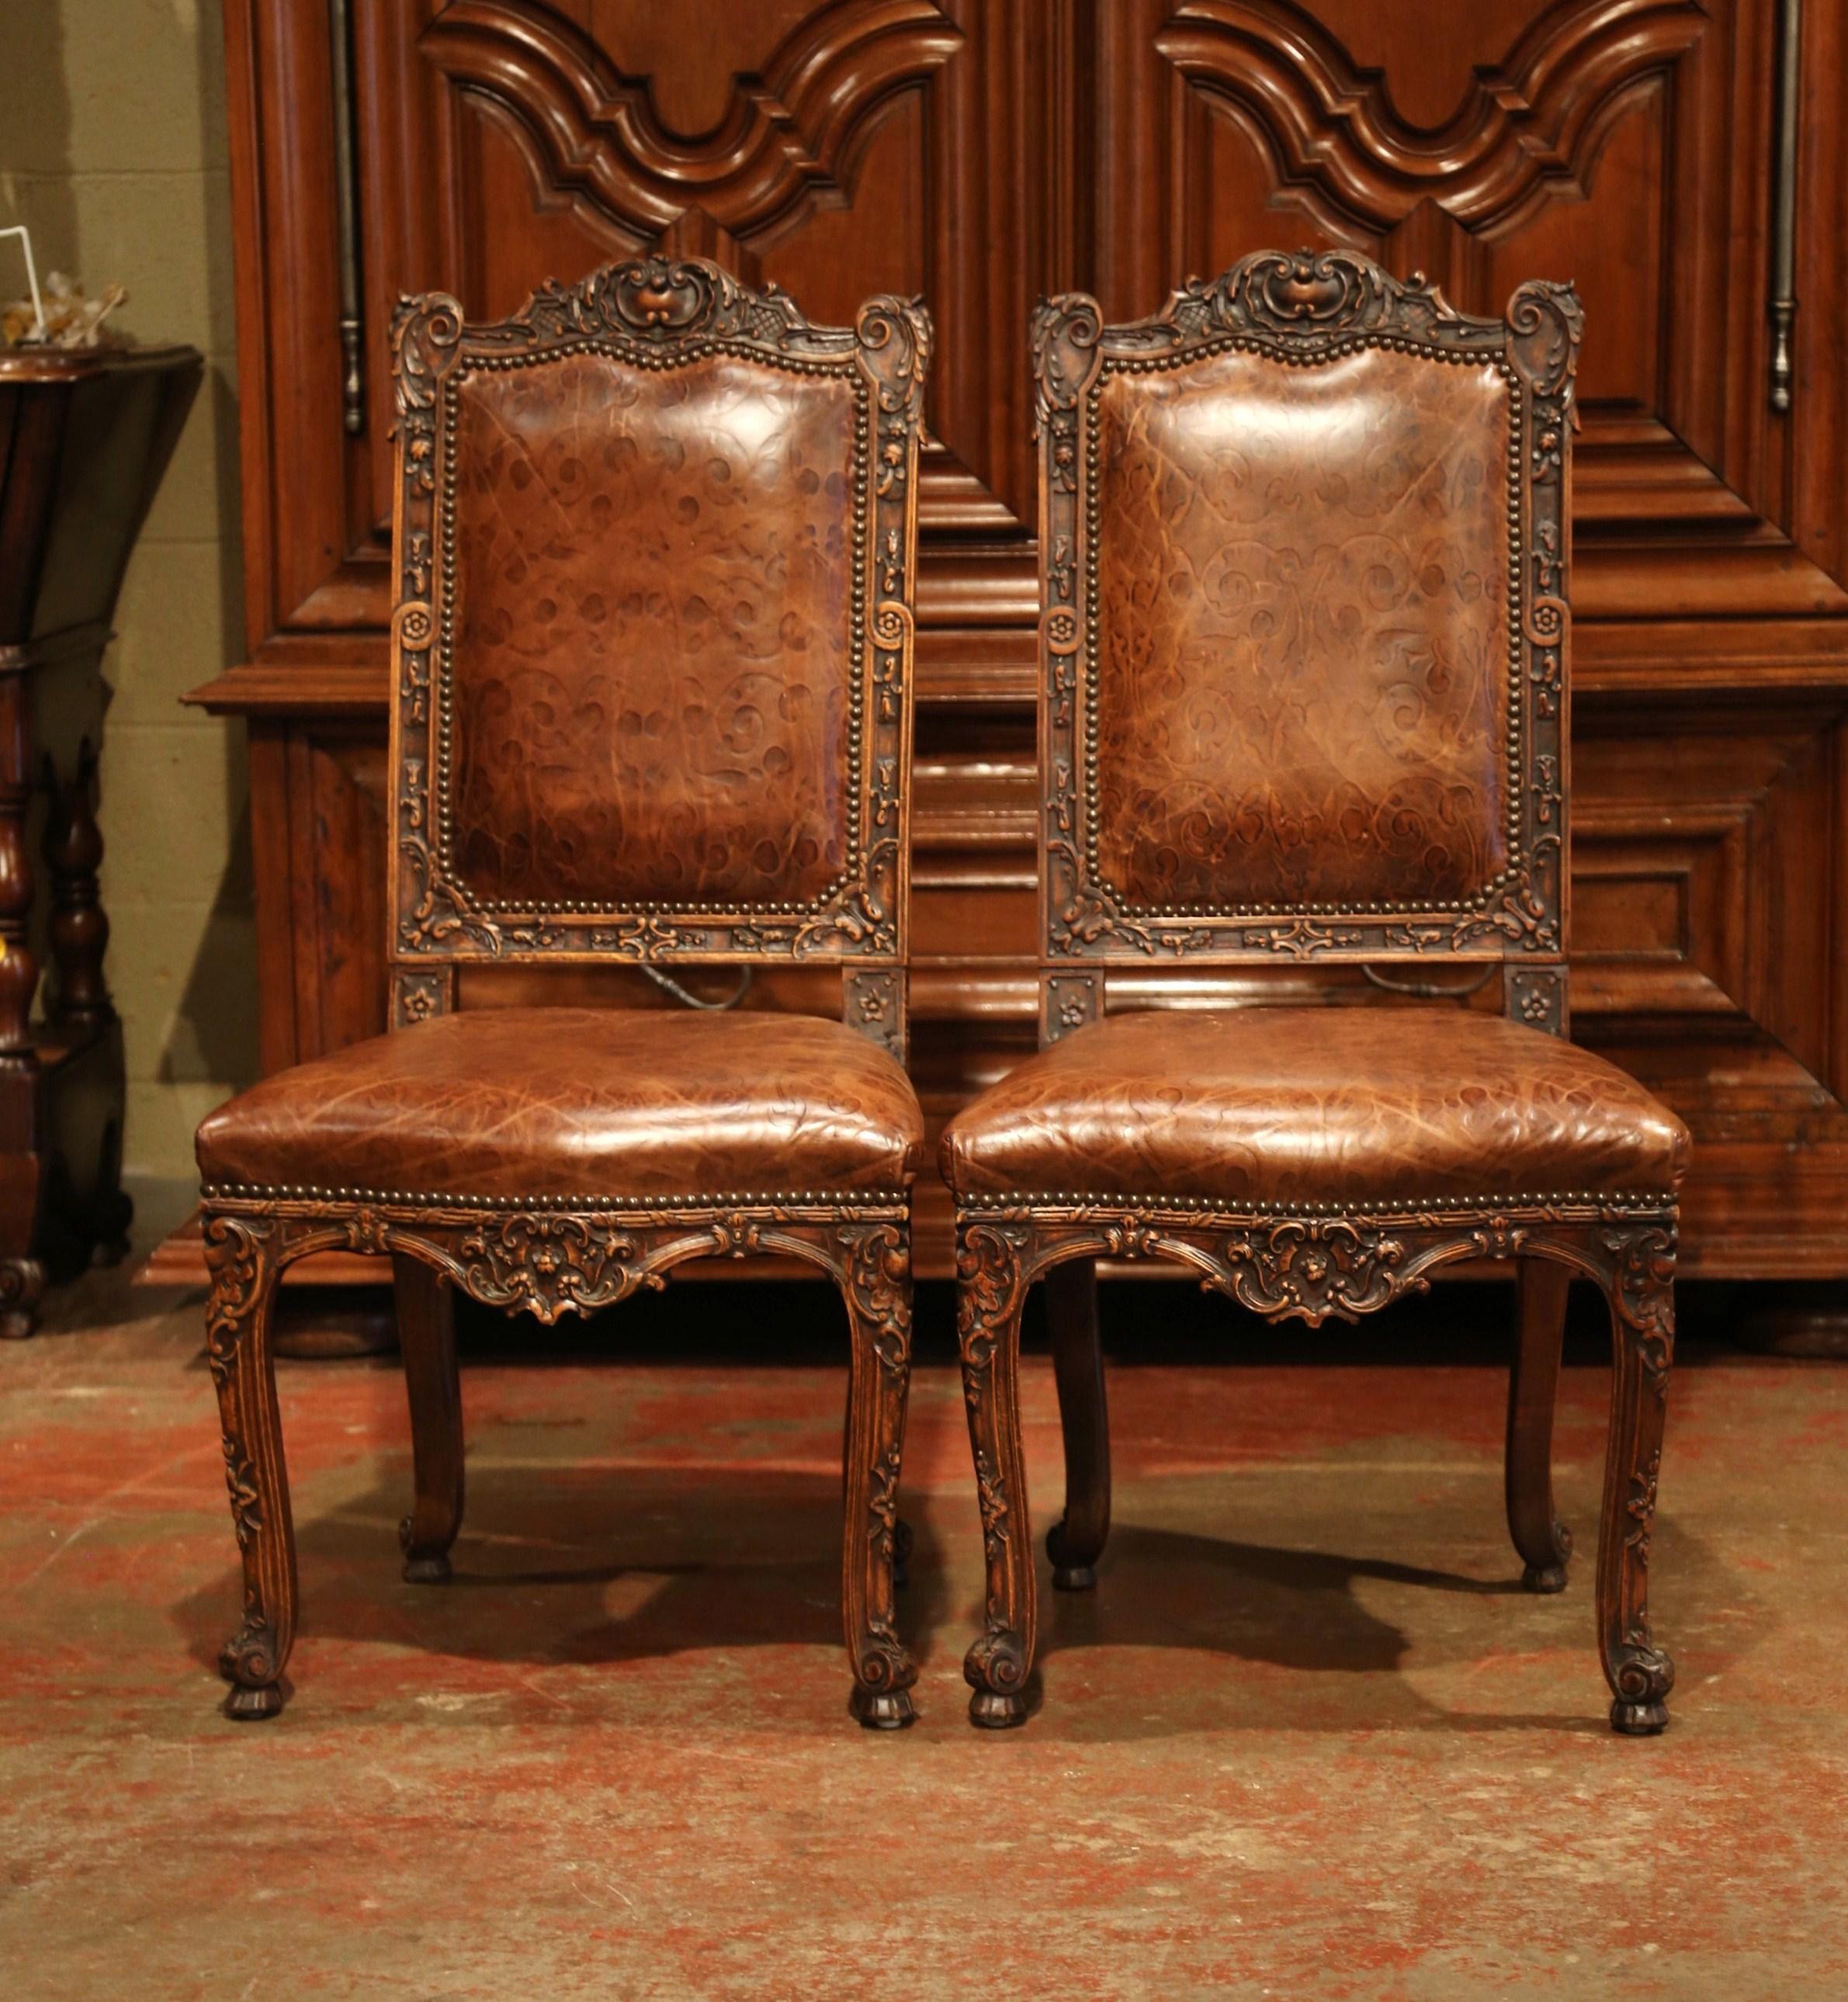 Place this elegant pair of antique side chairs in a study or library. Crafted in France circa 1860, the large fruitwood chairs stand on cabriole legs and escargot feet over a scalloped and bombe apron. The traditional chairs feature an ornate frame